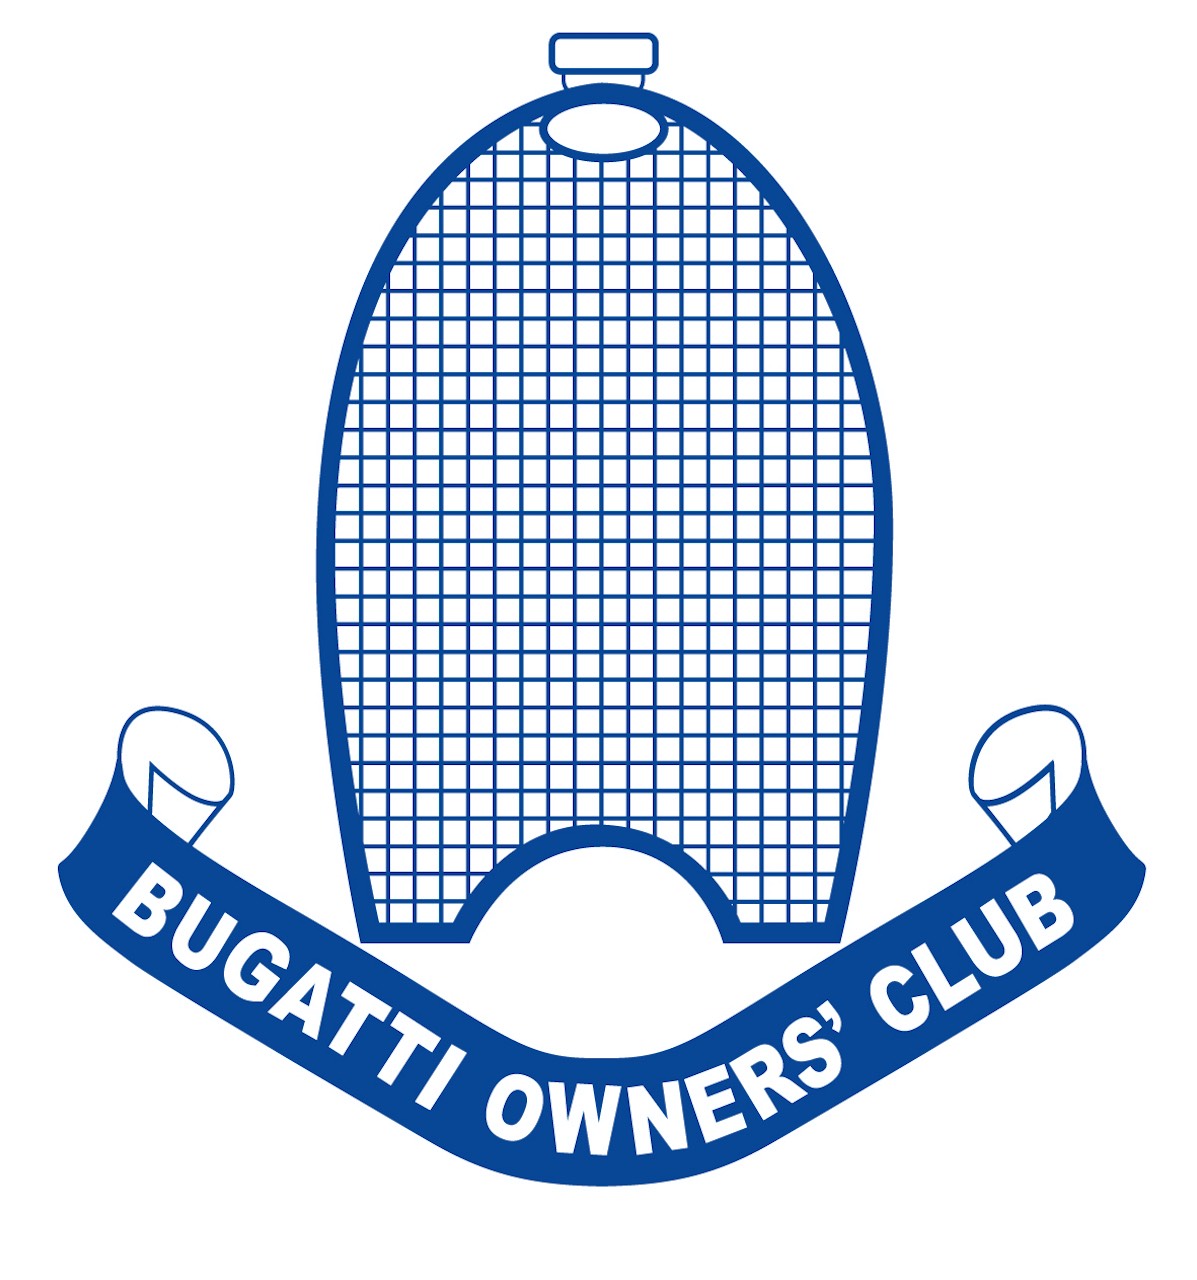 Bugatti Baby II gets seal of approval from Bugatti Owners Club